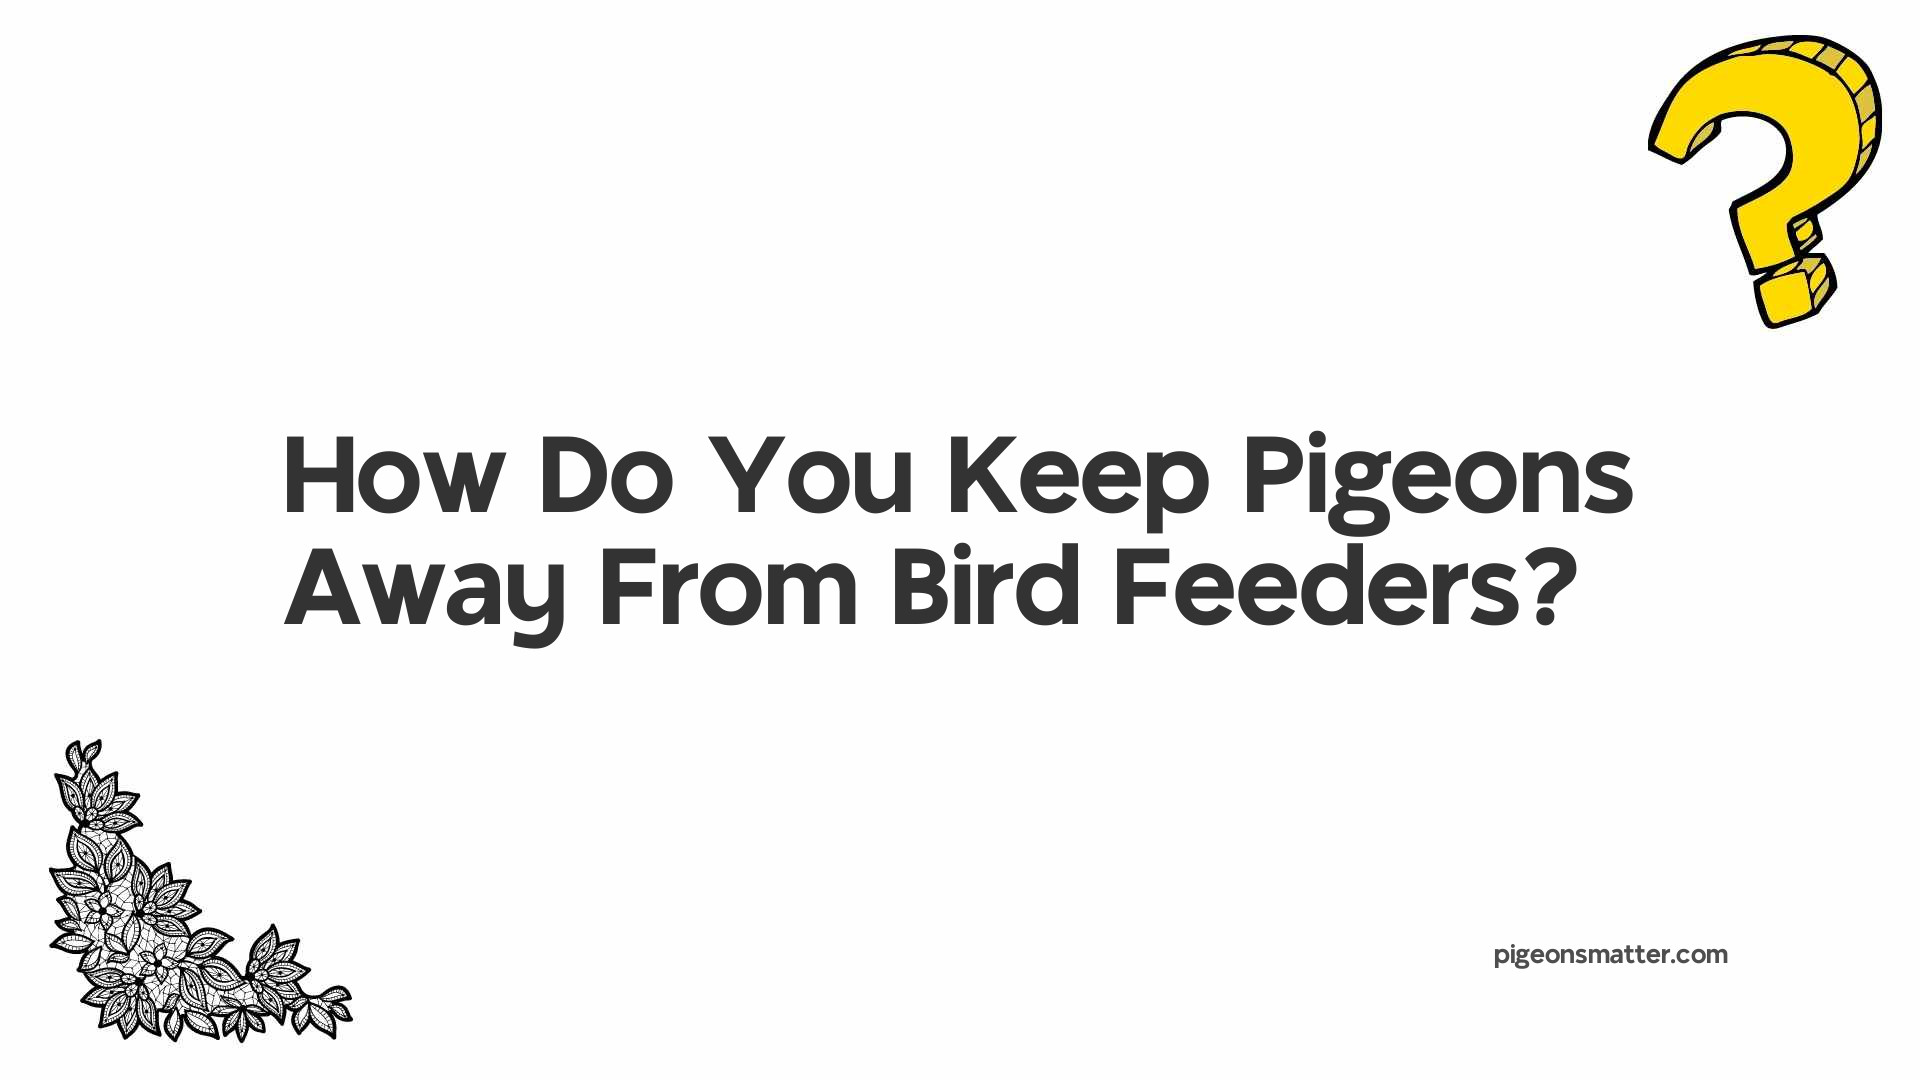 How Do You Keep Pigeons Away From Bird Feeders?